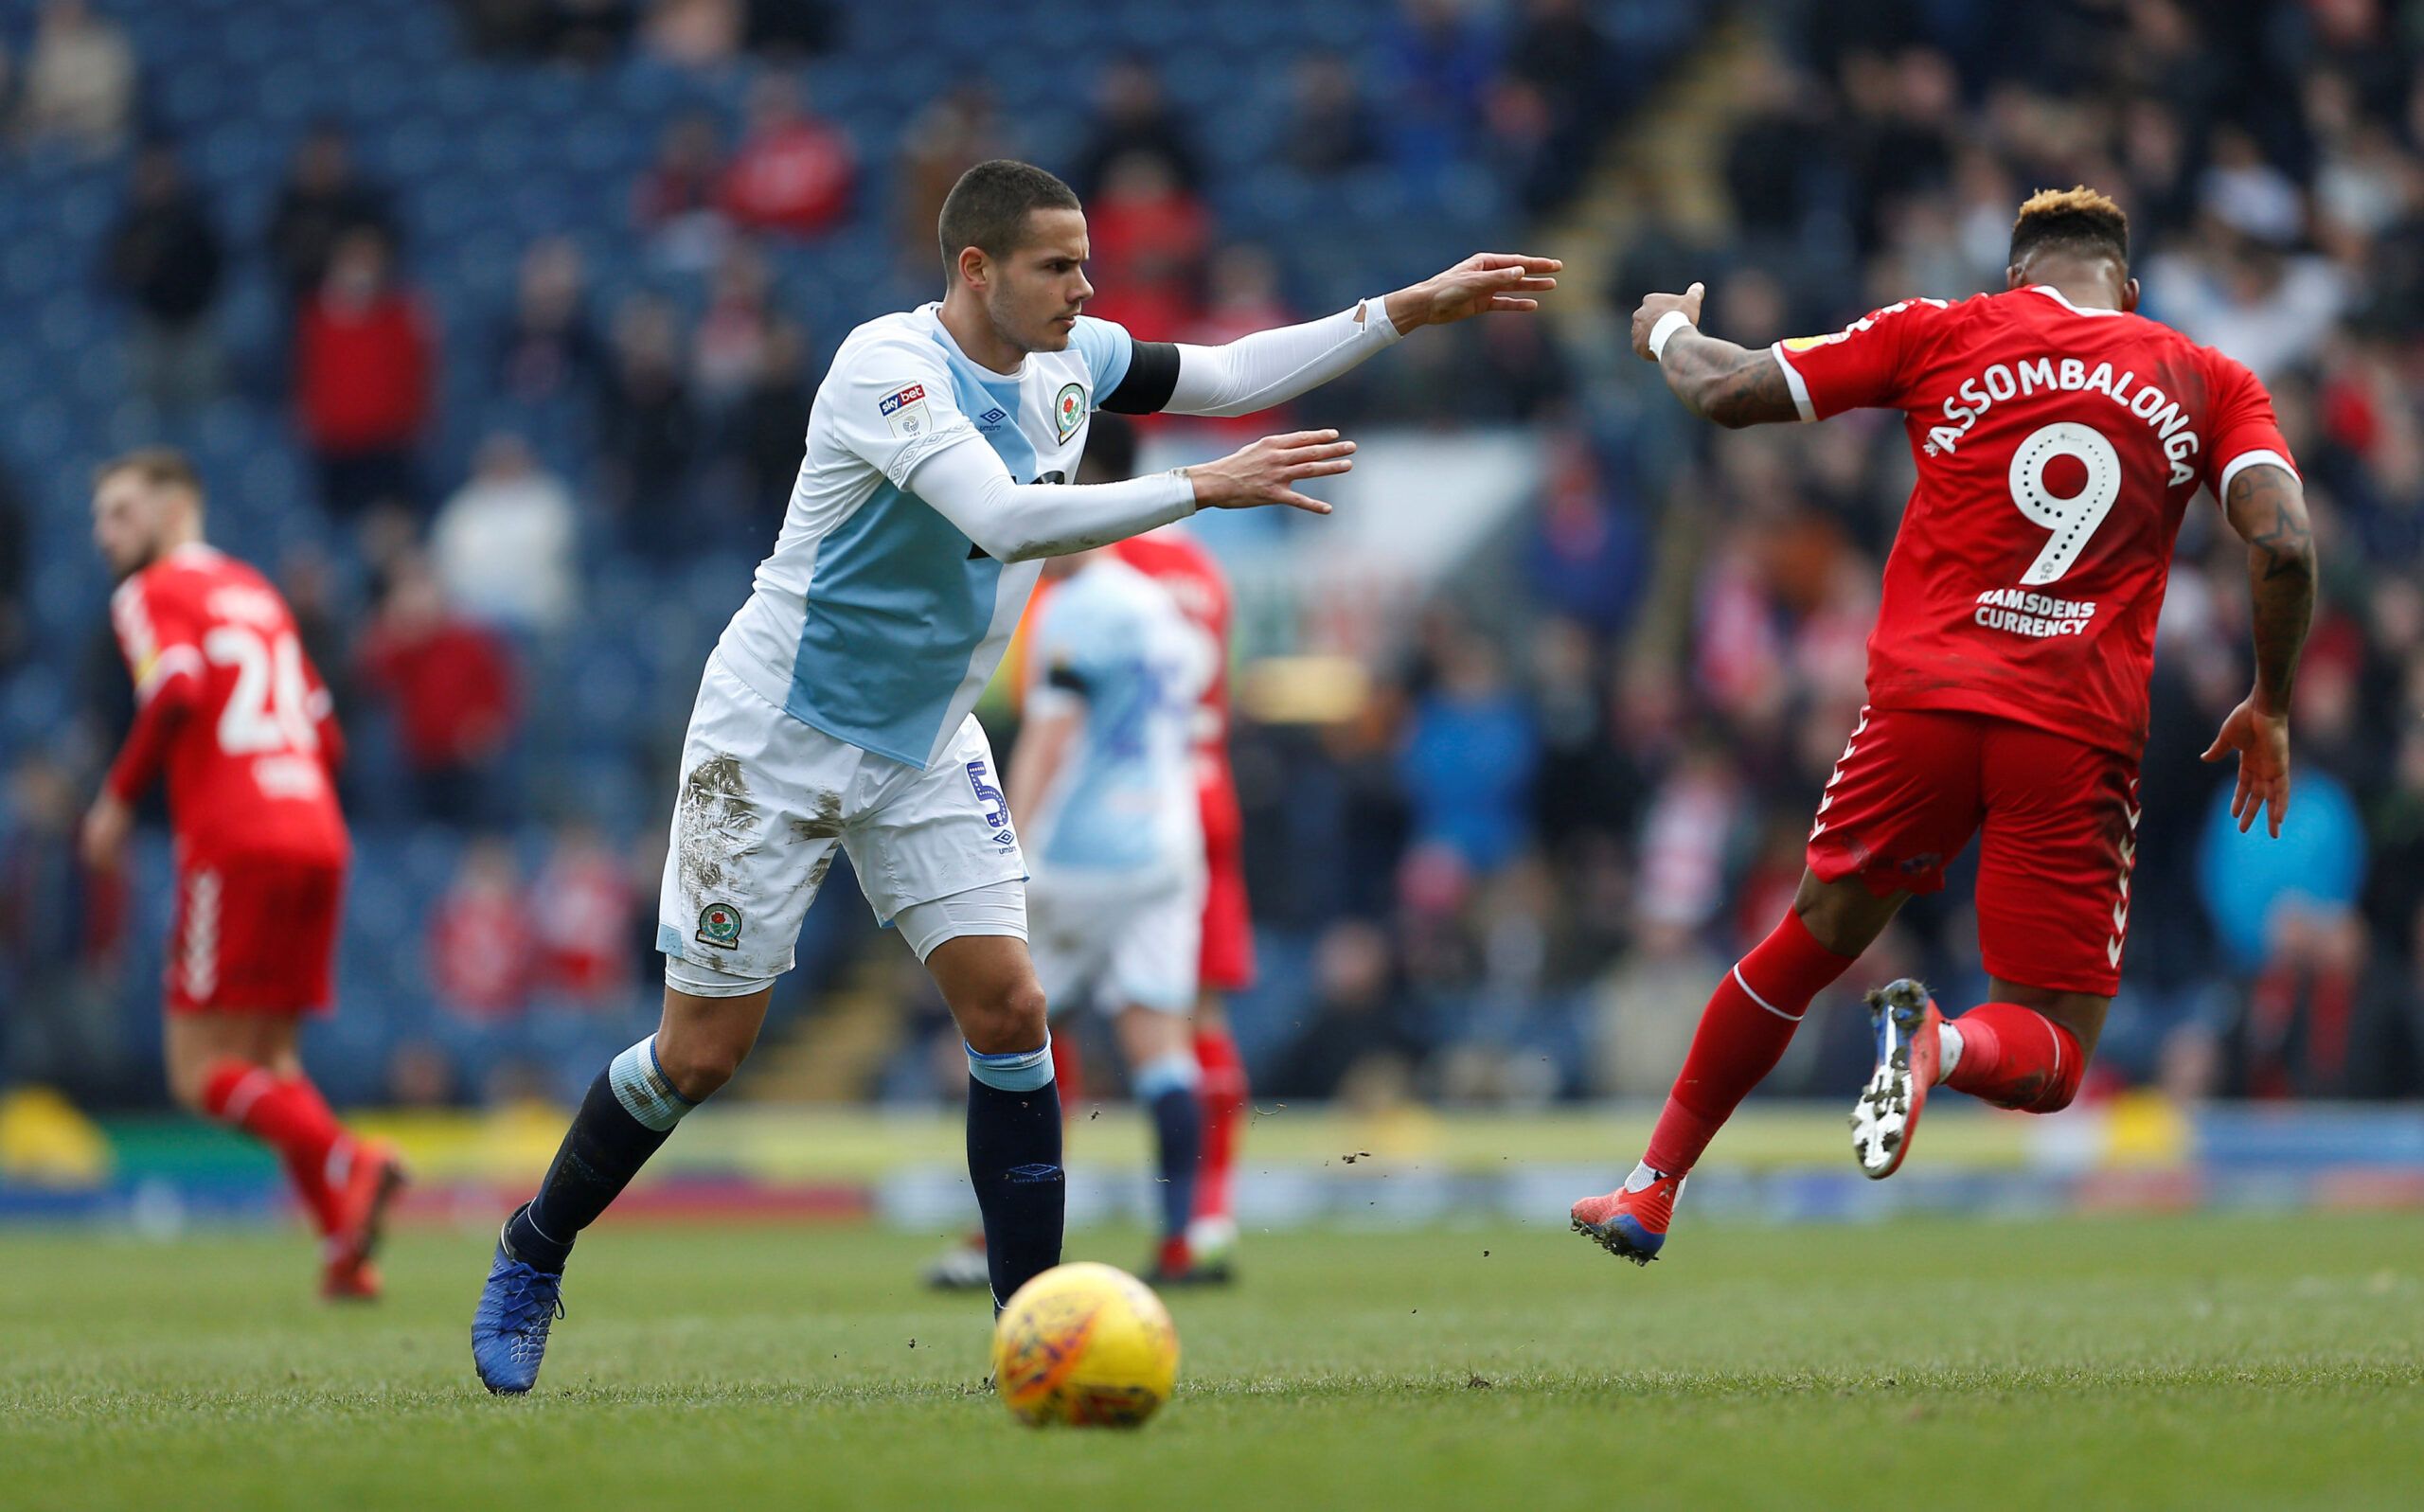 Soccer Football - Championship - Blackburn Rovers v Middlesbrough - Ewood Park, Blackburn, Britain - February 17, 2019   Blackburn Rovers' Jack Rodwell pushes Middlesbrough's Britt Assombalonga   Action Images/Craig Brough    EDITORIAL USE ONLY. No use with unauthorized audio, video, data, fixture lists, club/league logos or 